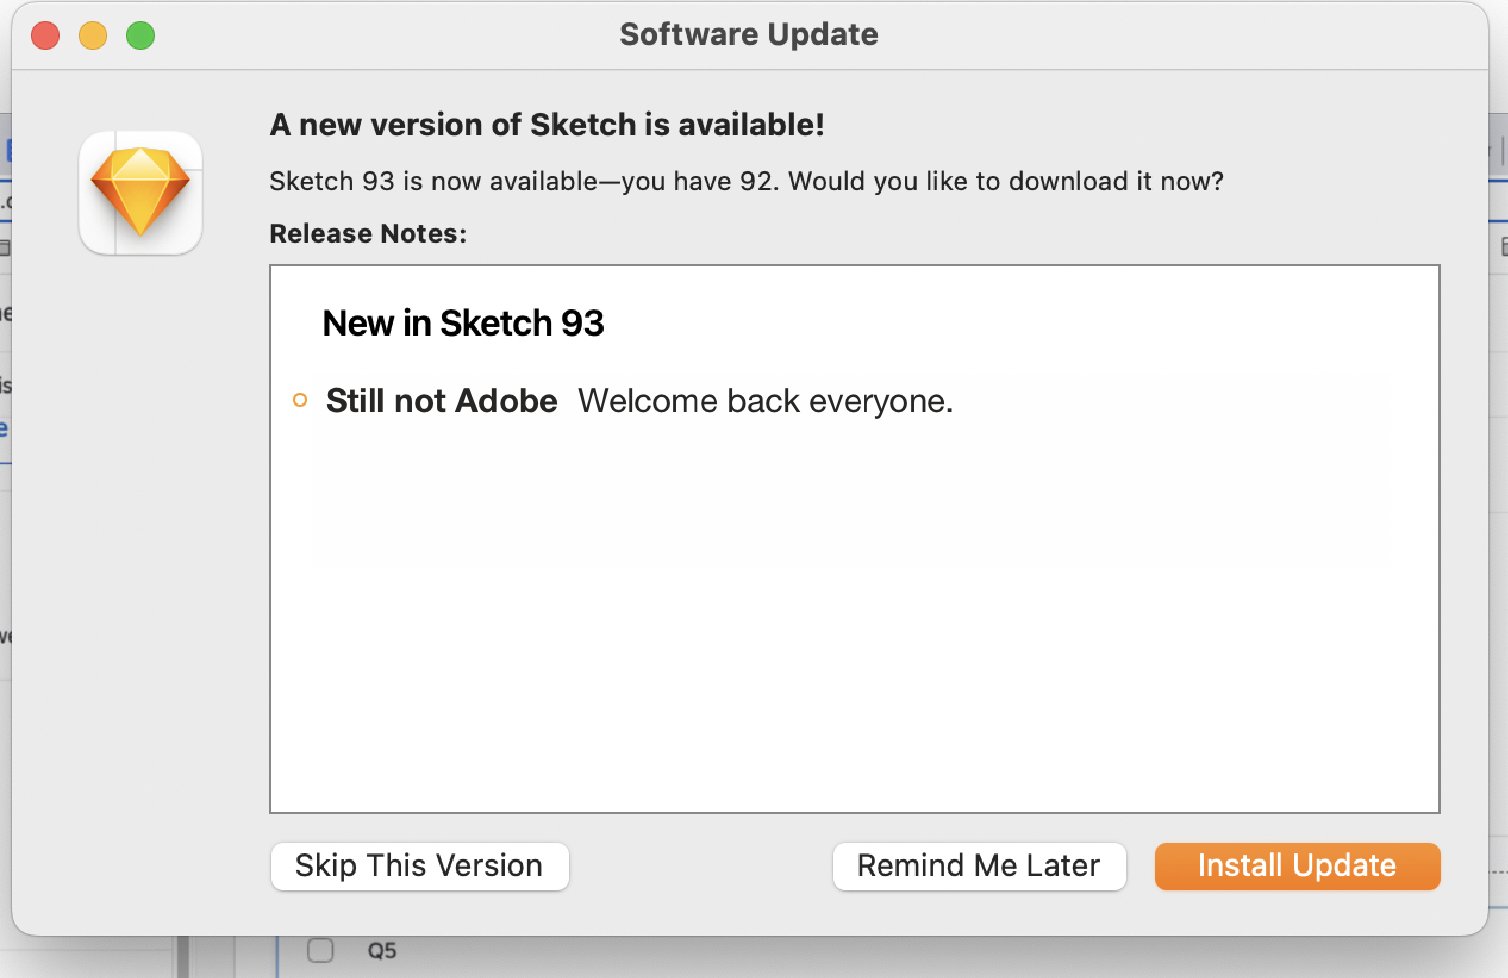 Sketch software update modal saying "New in Sketch 93: Still not Adobe. Welcome back everyone."